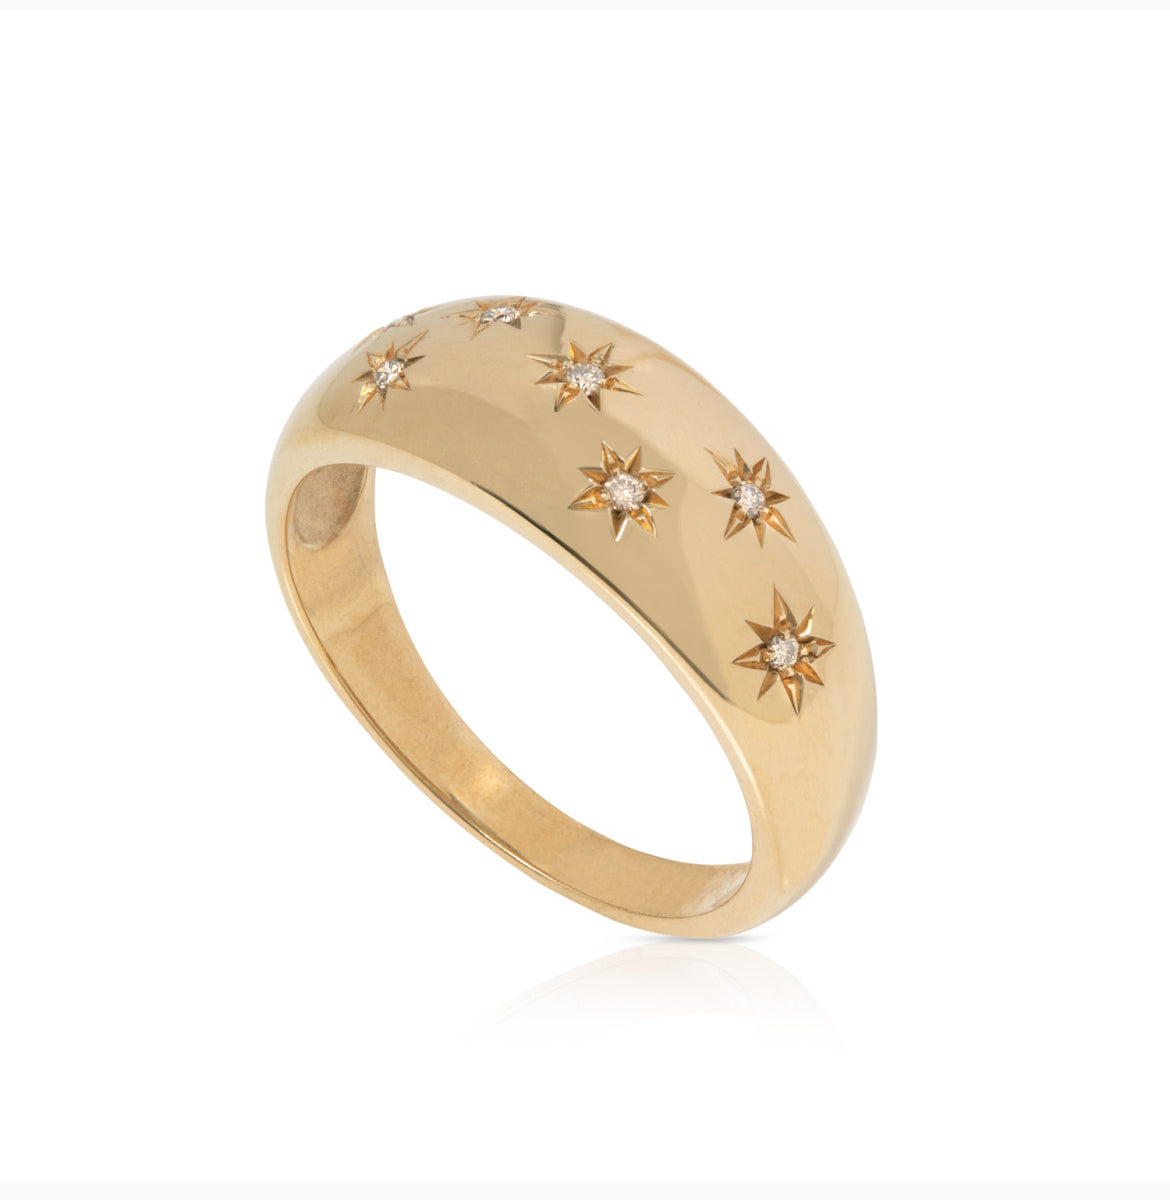 Make a Wish, Star Studded Dome Ring in Sapphire or Champagne Diamonds